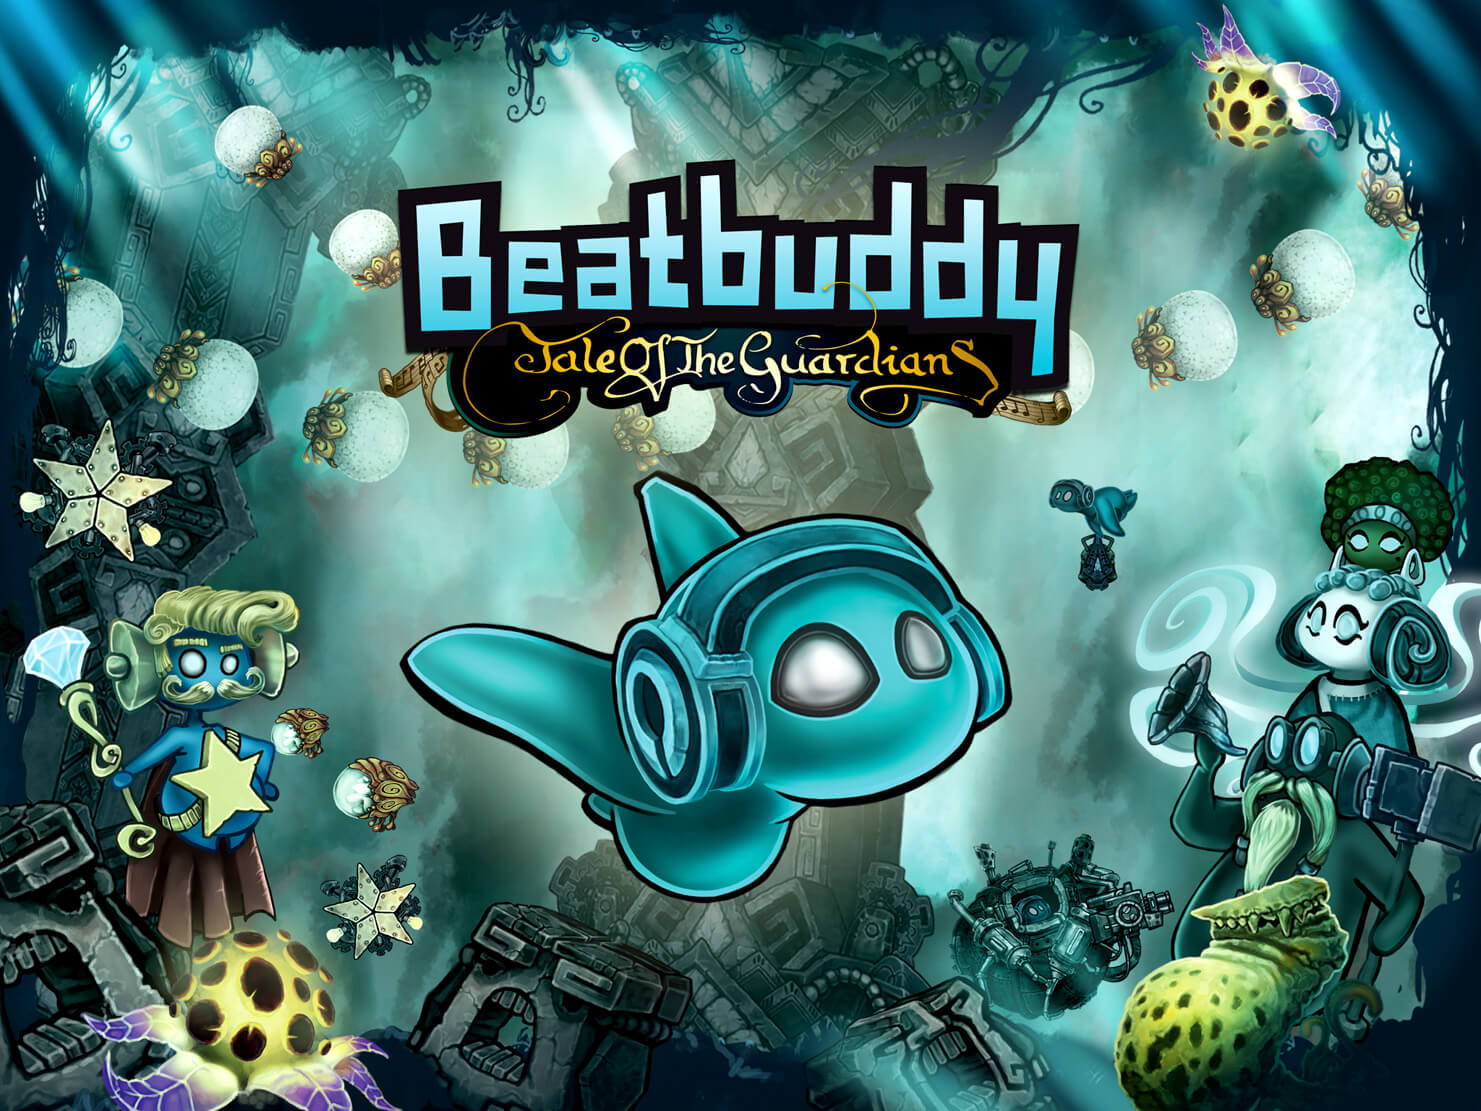 Beatbuddy: Tale of the Guardian